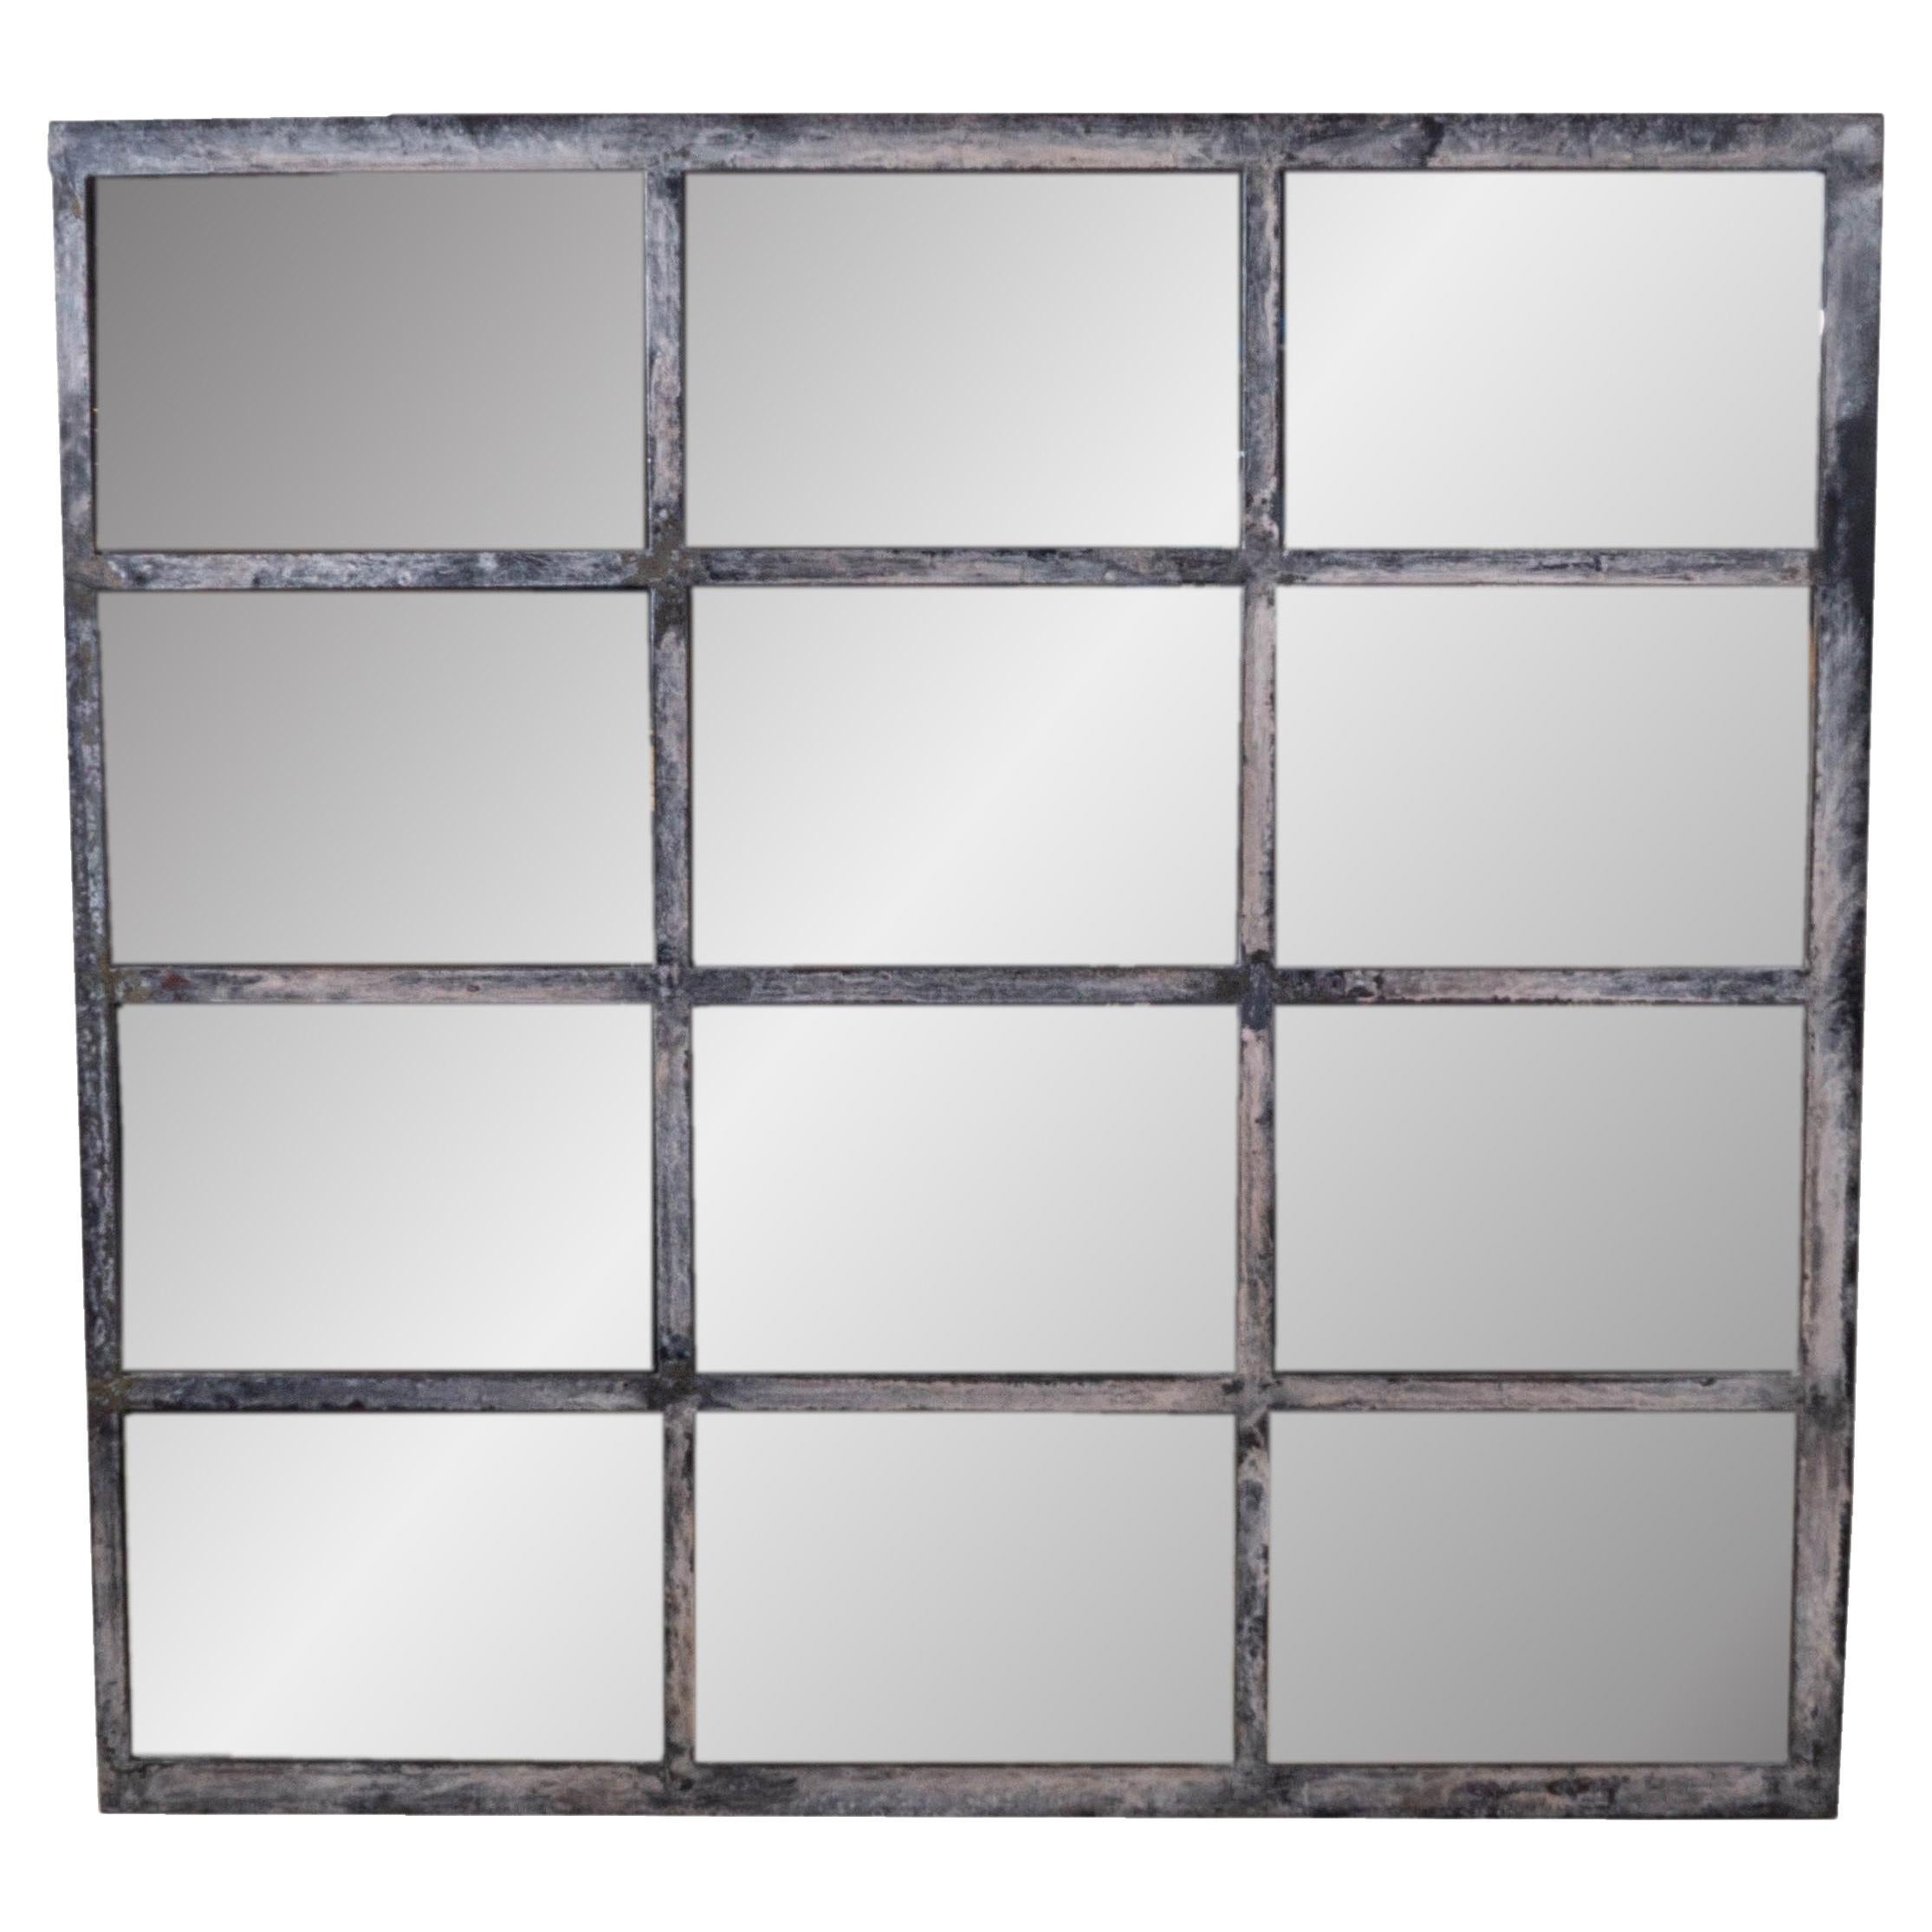 Industrial Iron Window Frame Mirror For Sale